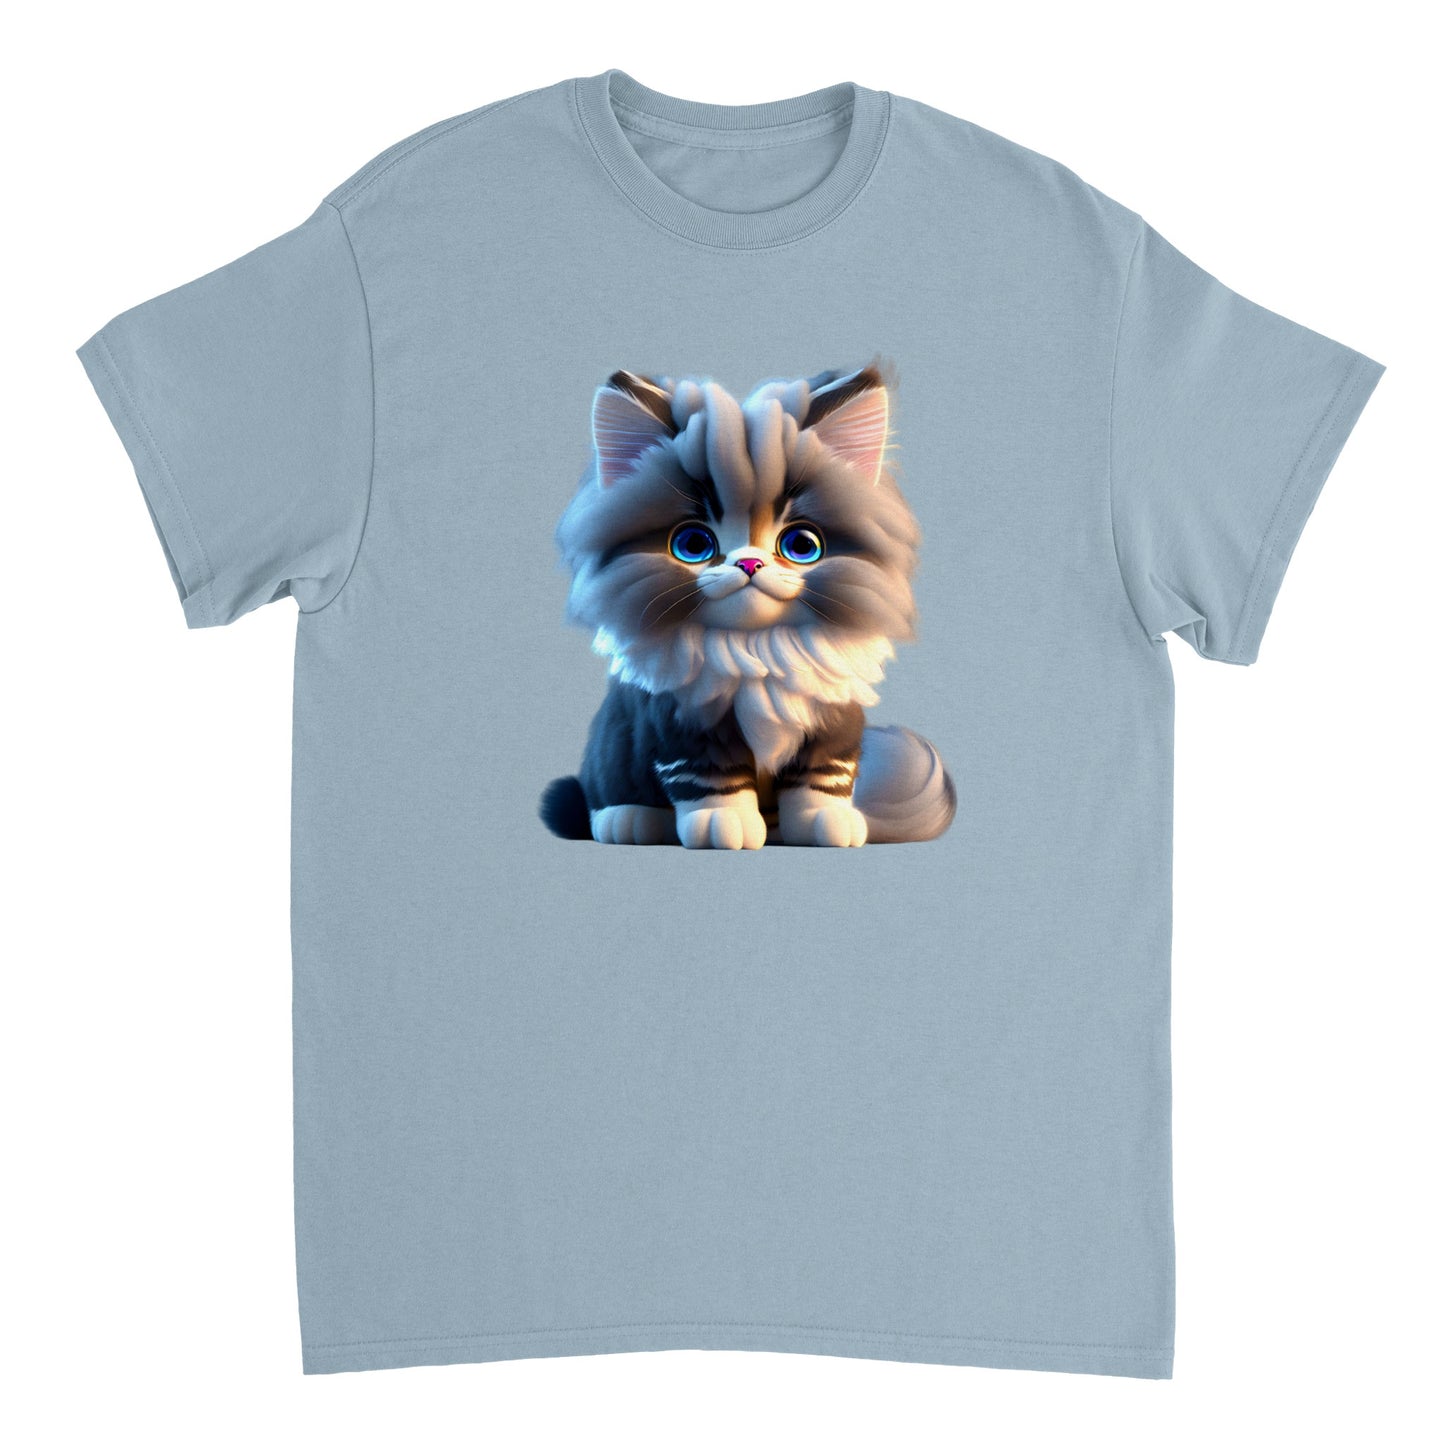 Adorable, Cool, Cute Cats and Kittens Toy - Heavyweight Unisex Crewneck T-shirt 4